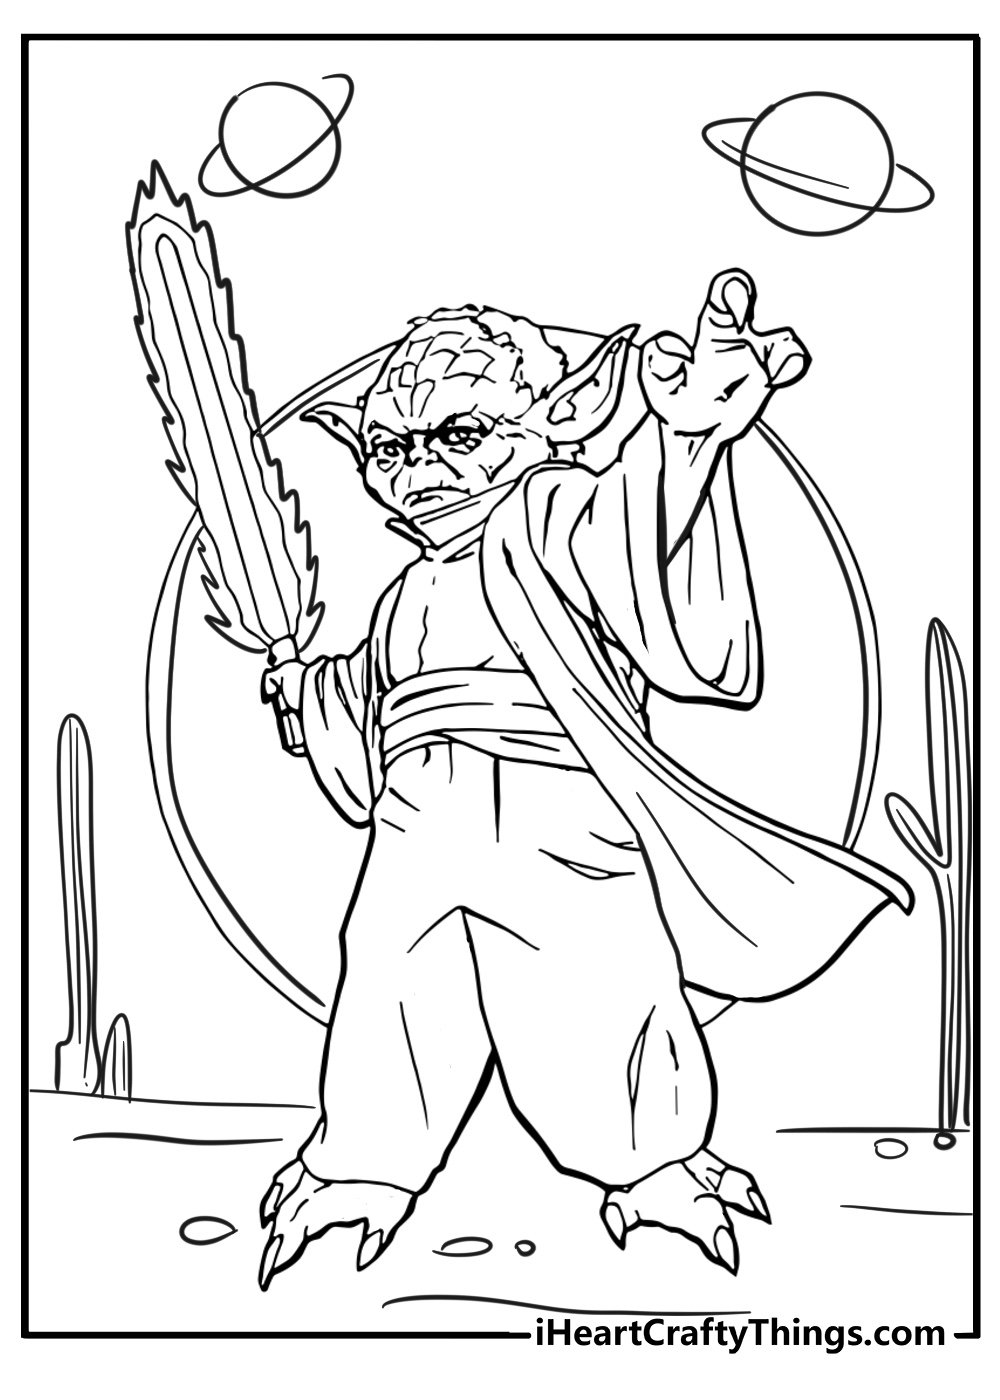 Yoda fighting with lightsaber coloring in for kids